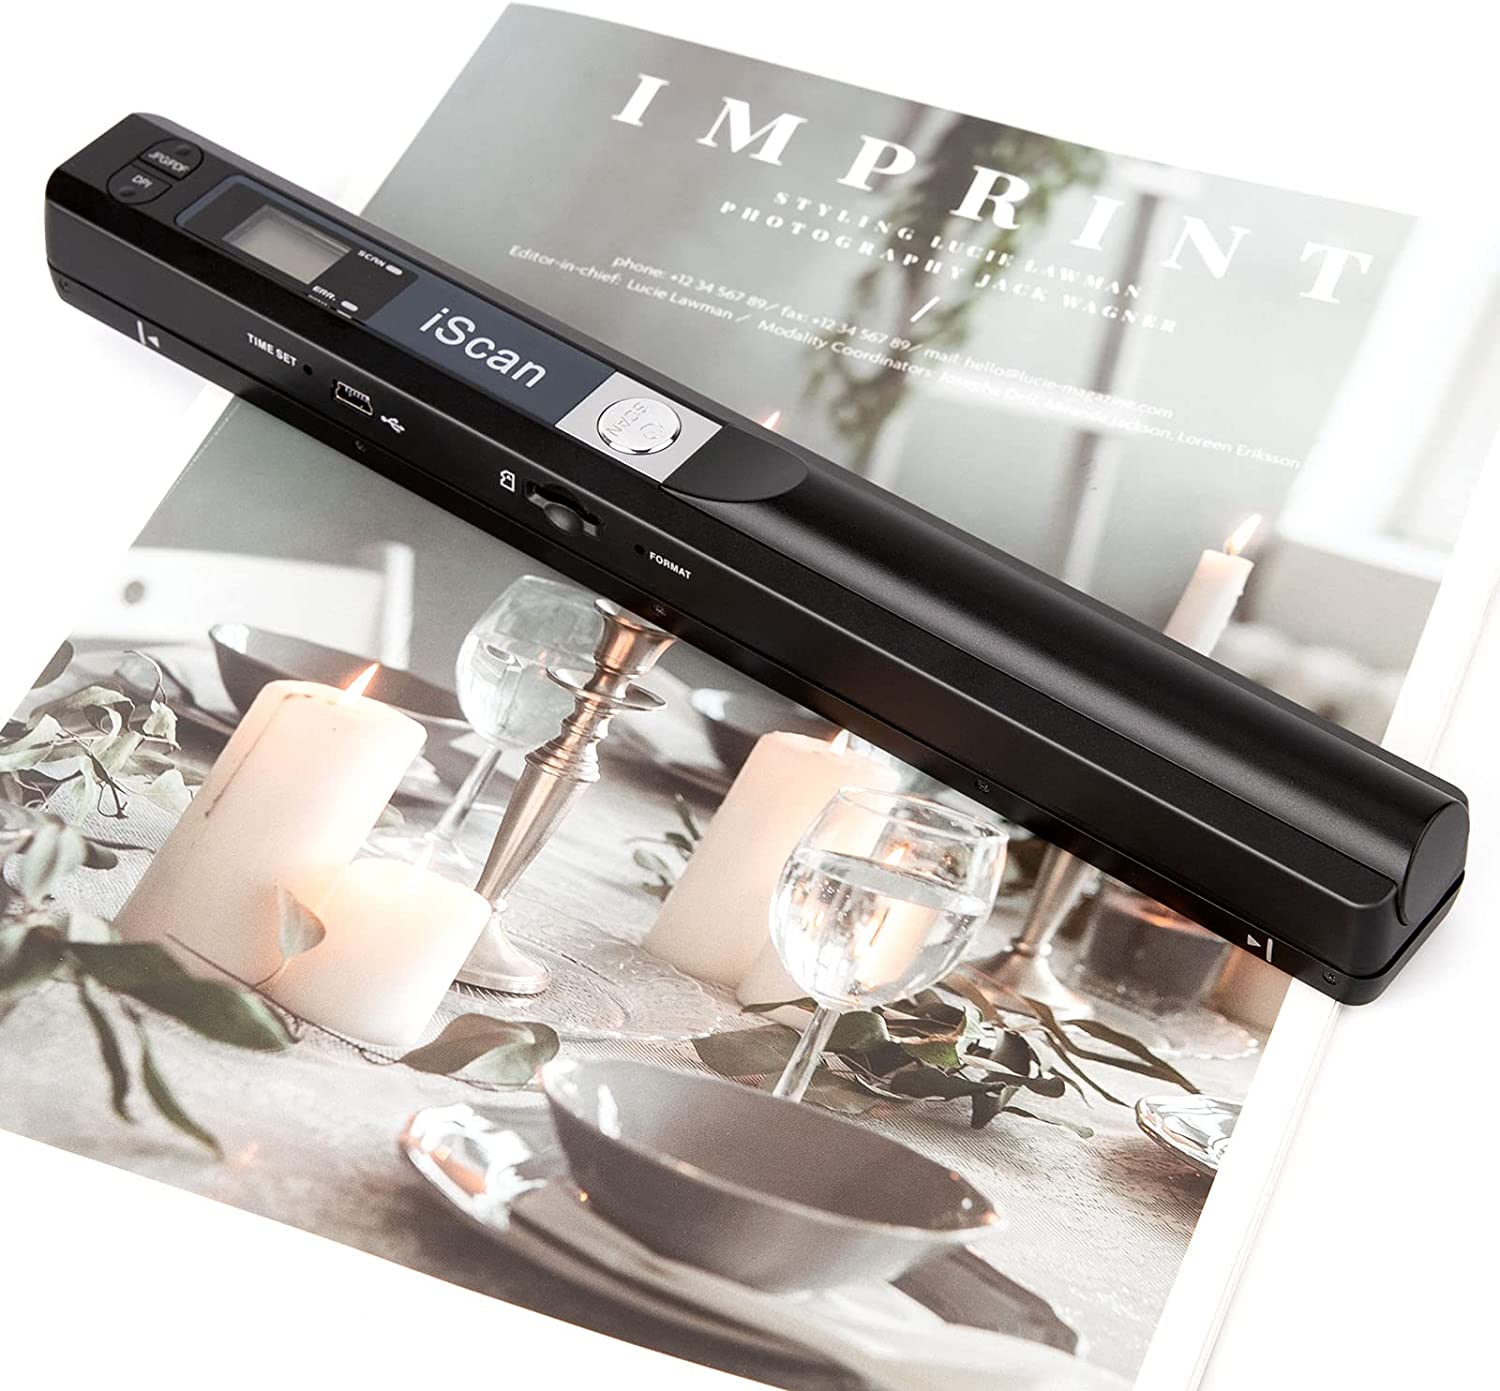 Portable scanner Handheld document scanner A4 Size 900 DPI JPG/PDF Formate LCD Display for Business Reciepts Books image with 32G SD Card